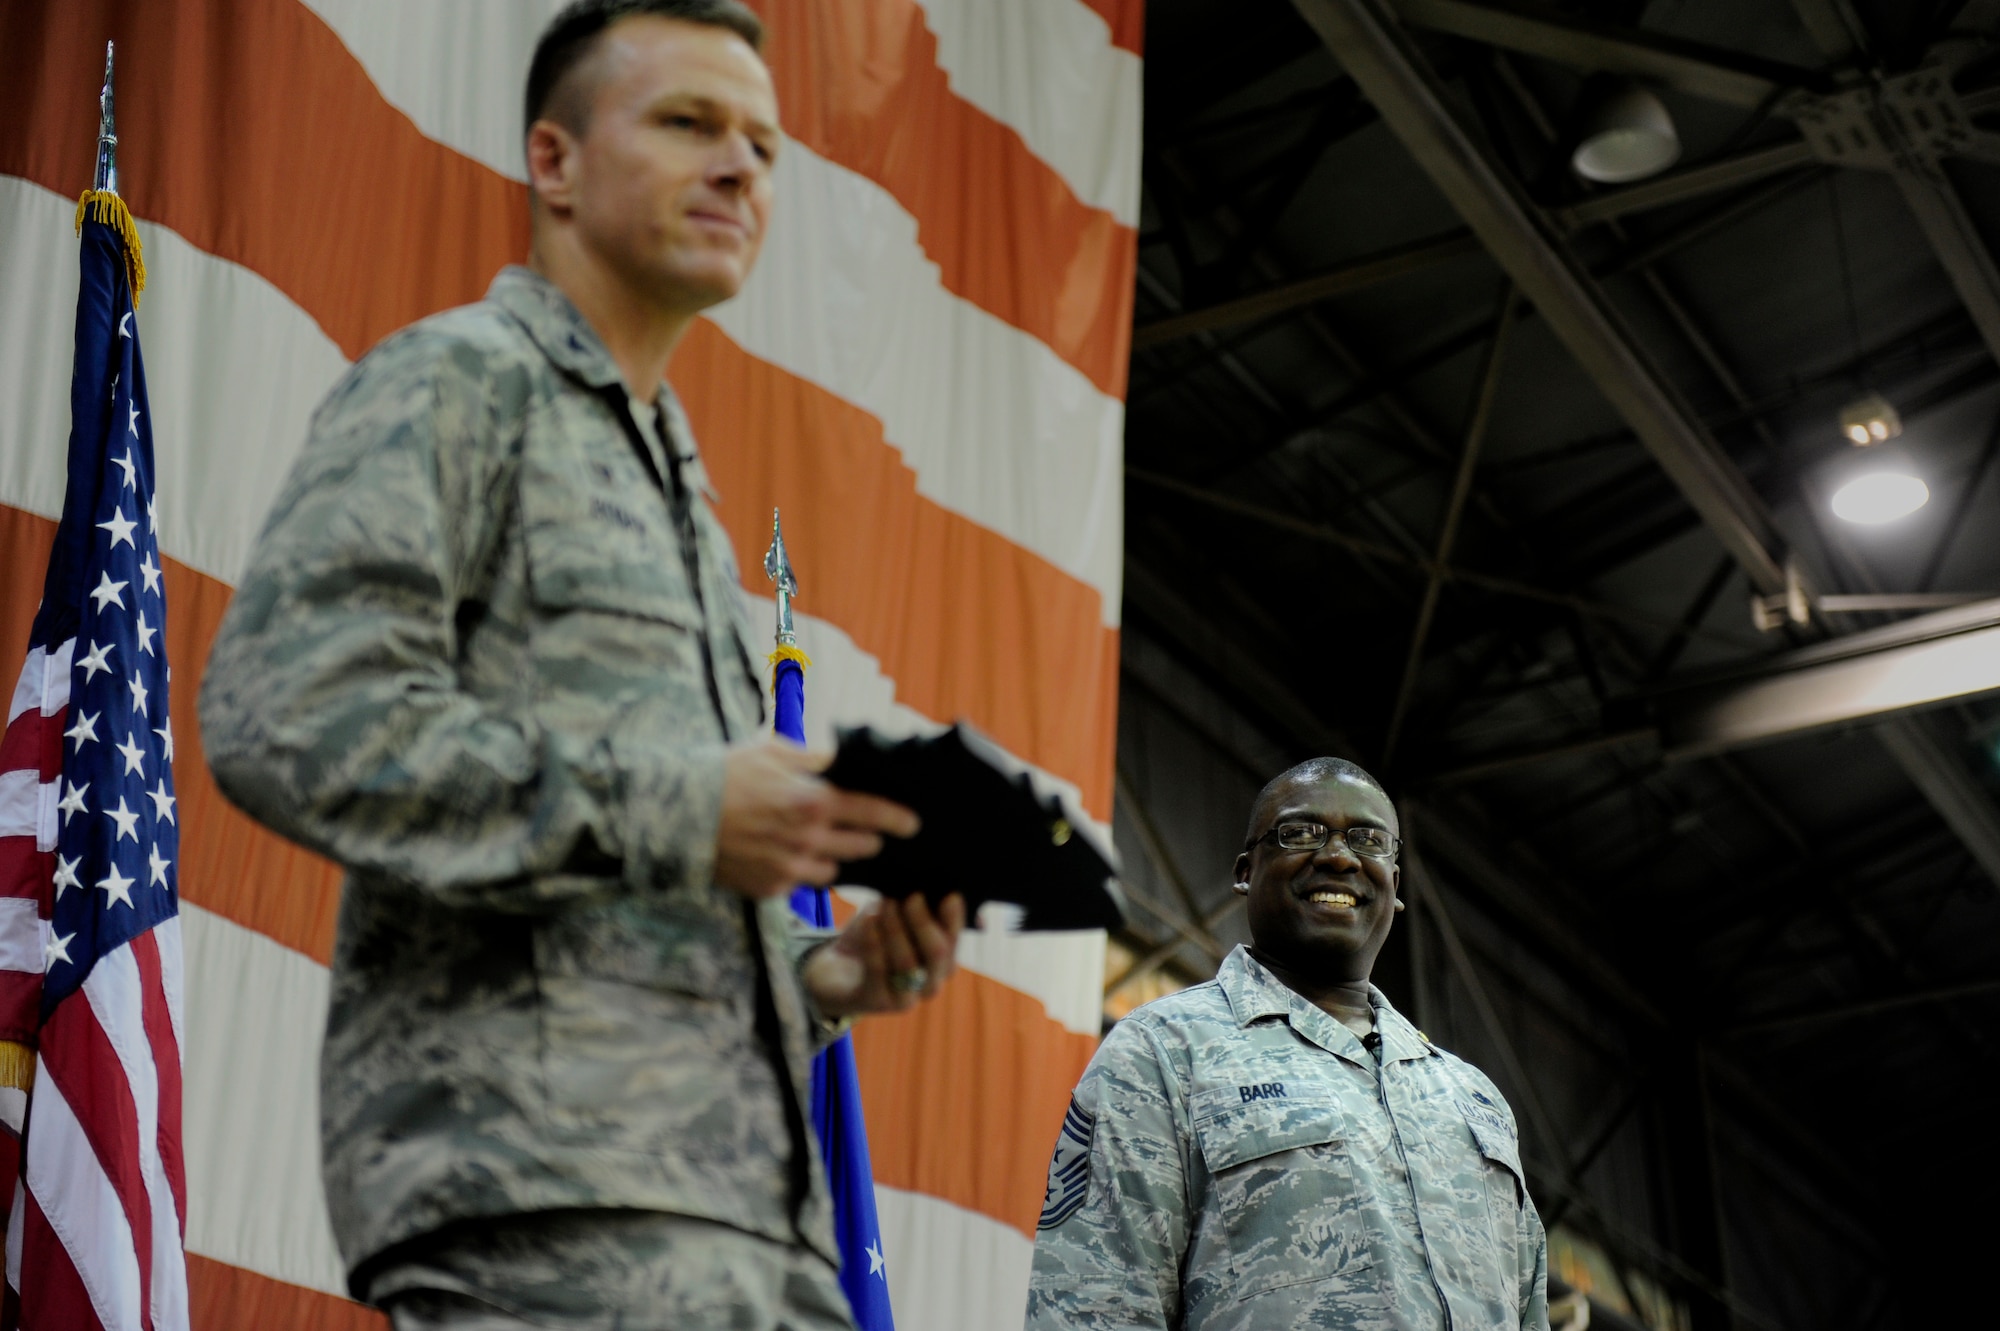 Col. Kenneth P. Ekman, 8th Fighter Wing commander, says a few words before presenting a gift to Chief Master Sgt. Lee Barr, 8th FW command chief, during Barr’s retirement ceremony at Kunsan Air Base, Republic of Korea, May 12, 2015. Barr spent 22 years in the security forces career field while supporting and deploying in Operations Desert Shield and Storm, Southern Watch, Noble Eagle, Iraqi Freedom and Odyssey Dawn. He will have served in the Air Force for 30 years when he retires in November. (U.S. Air Force photo by Senior Airman Taylor Curry/Released) 